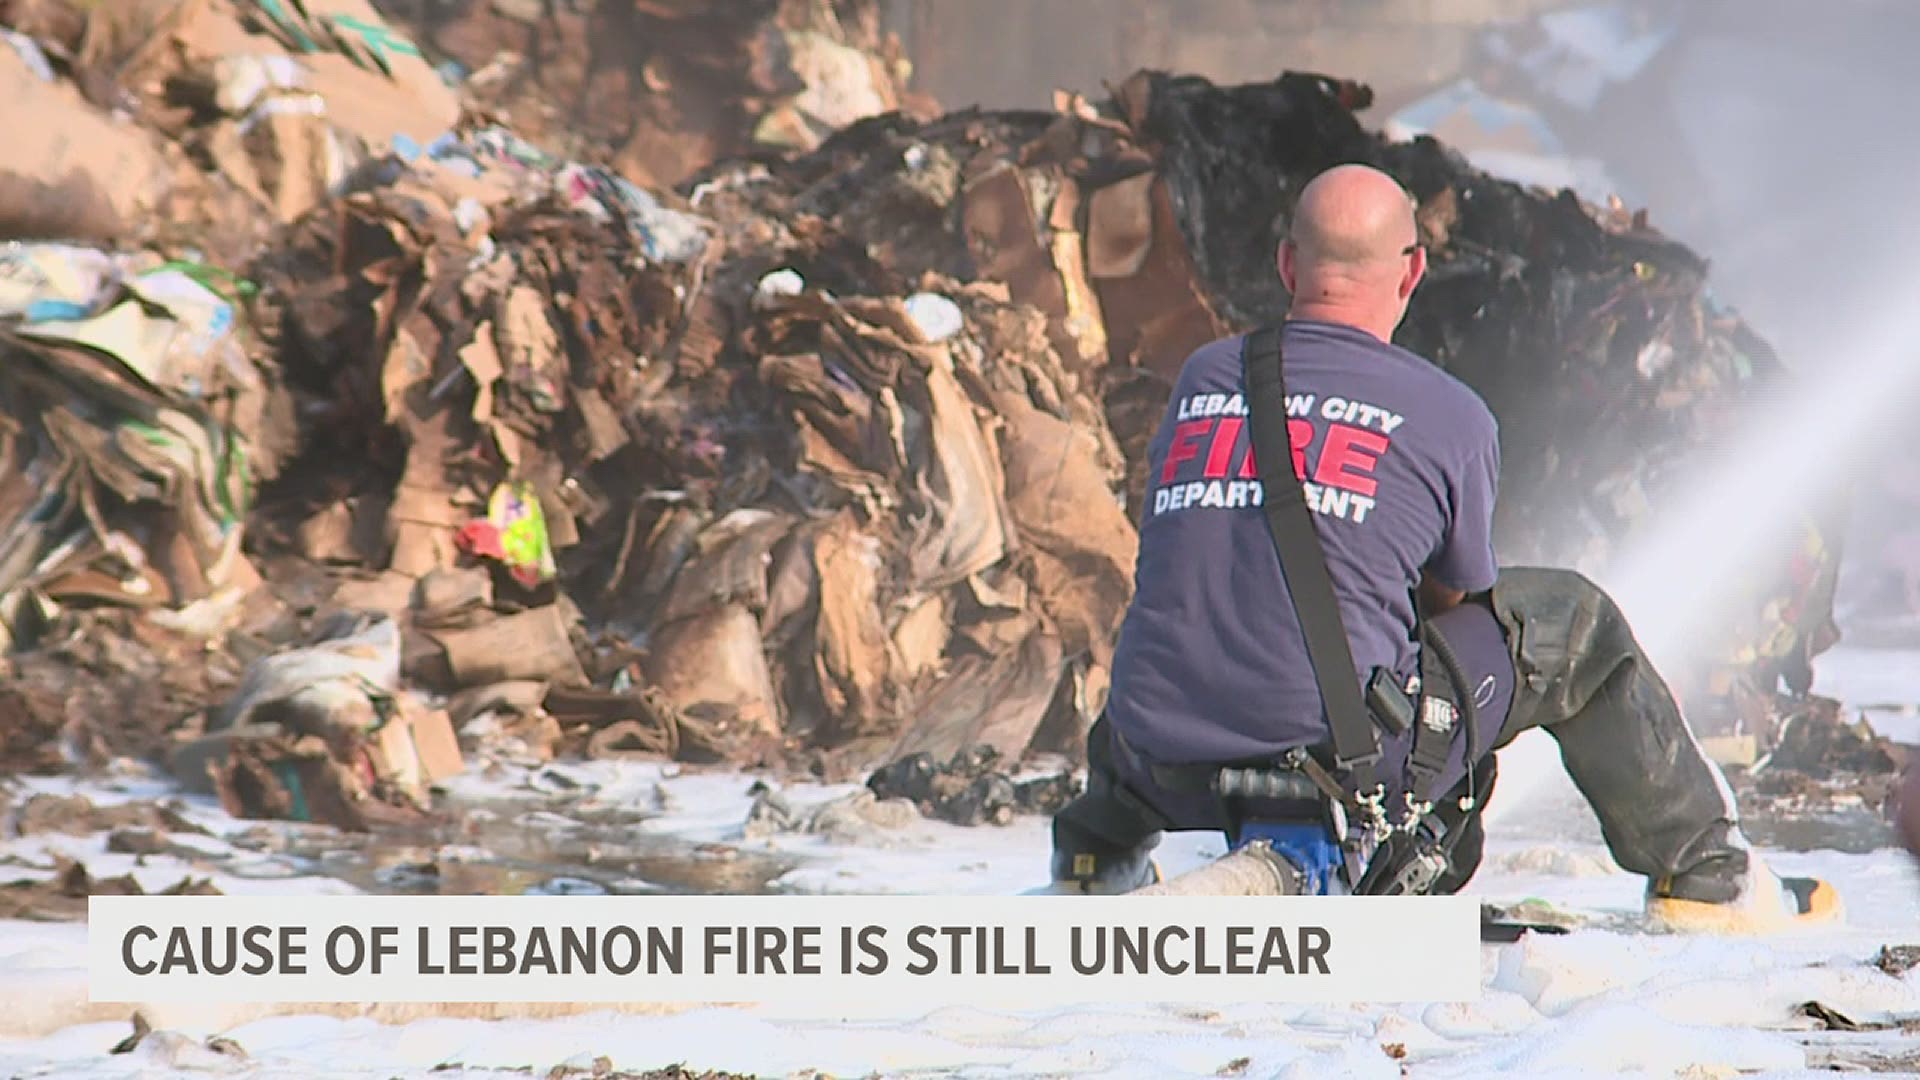 Fire crews in Lebanon County have put in 20+ hours to contain a major fire which broke out Sunday night.